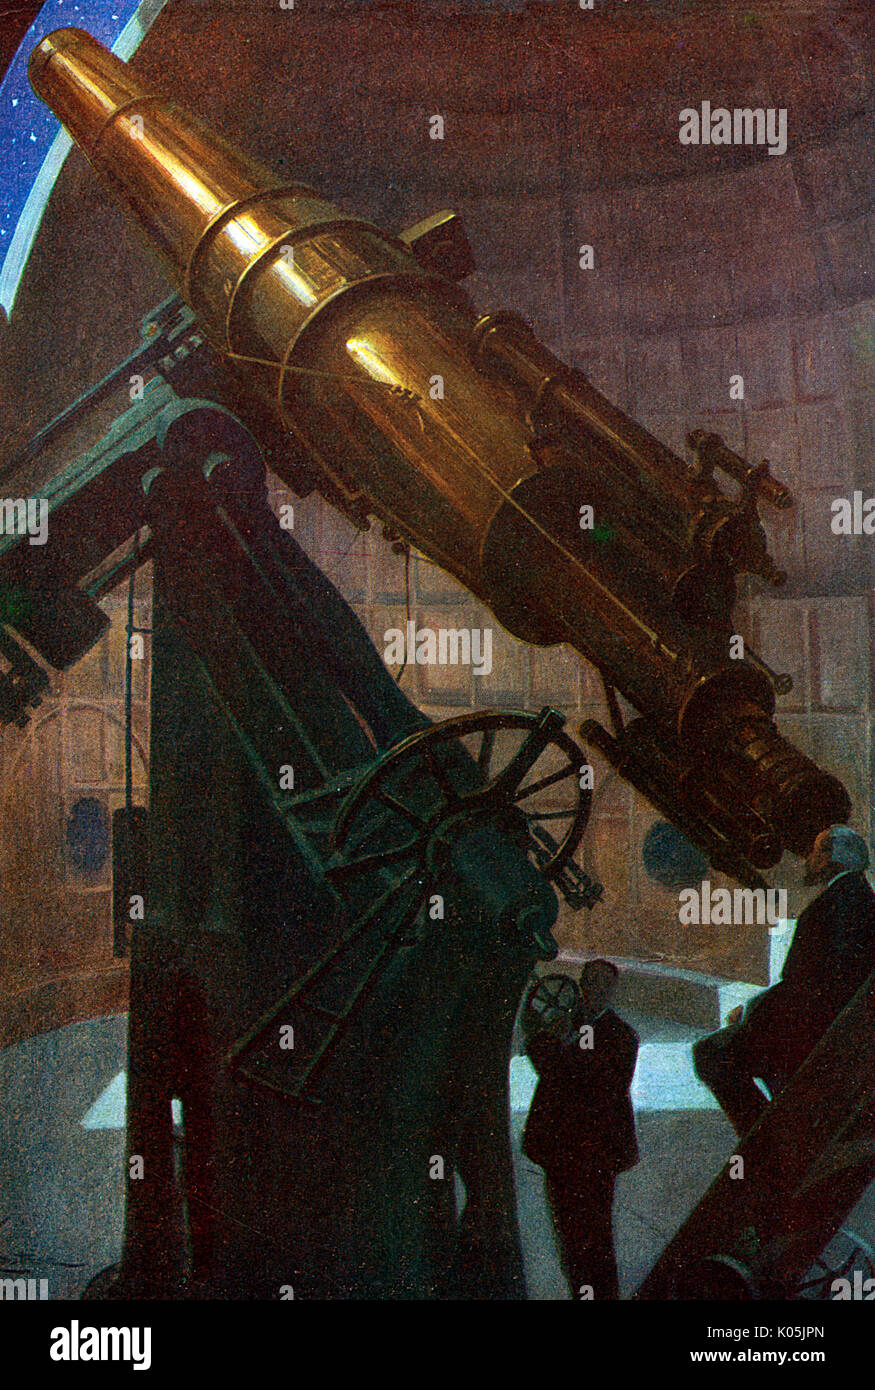 Astronomical telescope at the Paris Observatory, 1926. Stock Photo